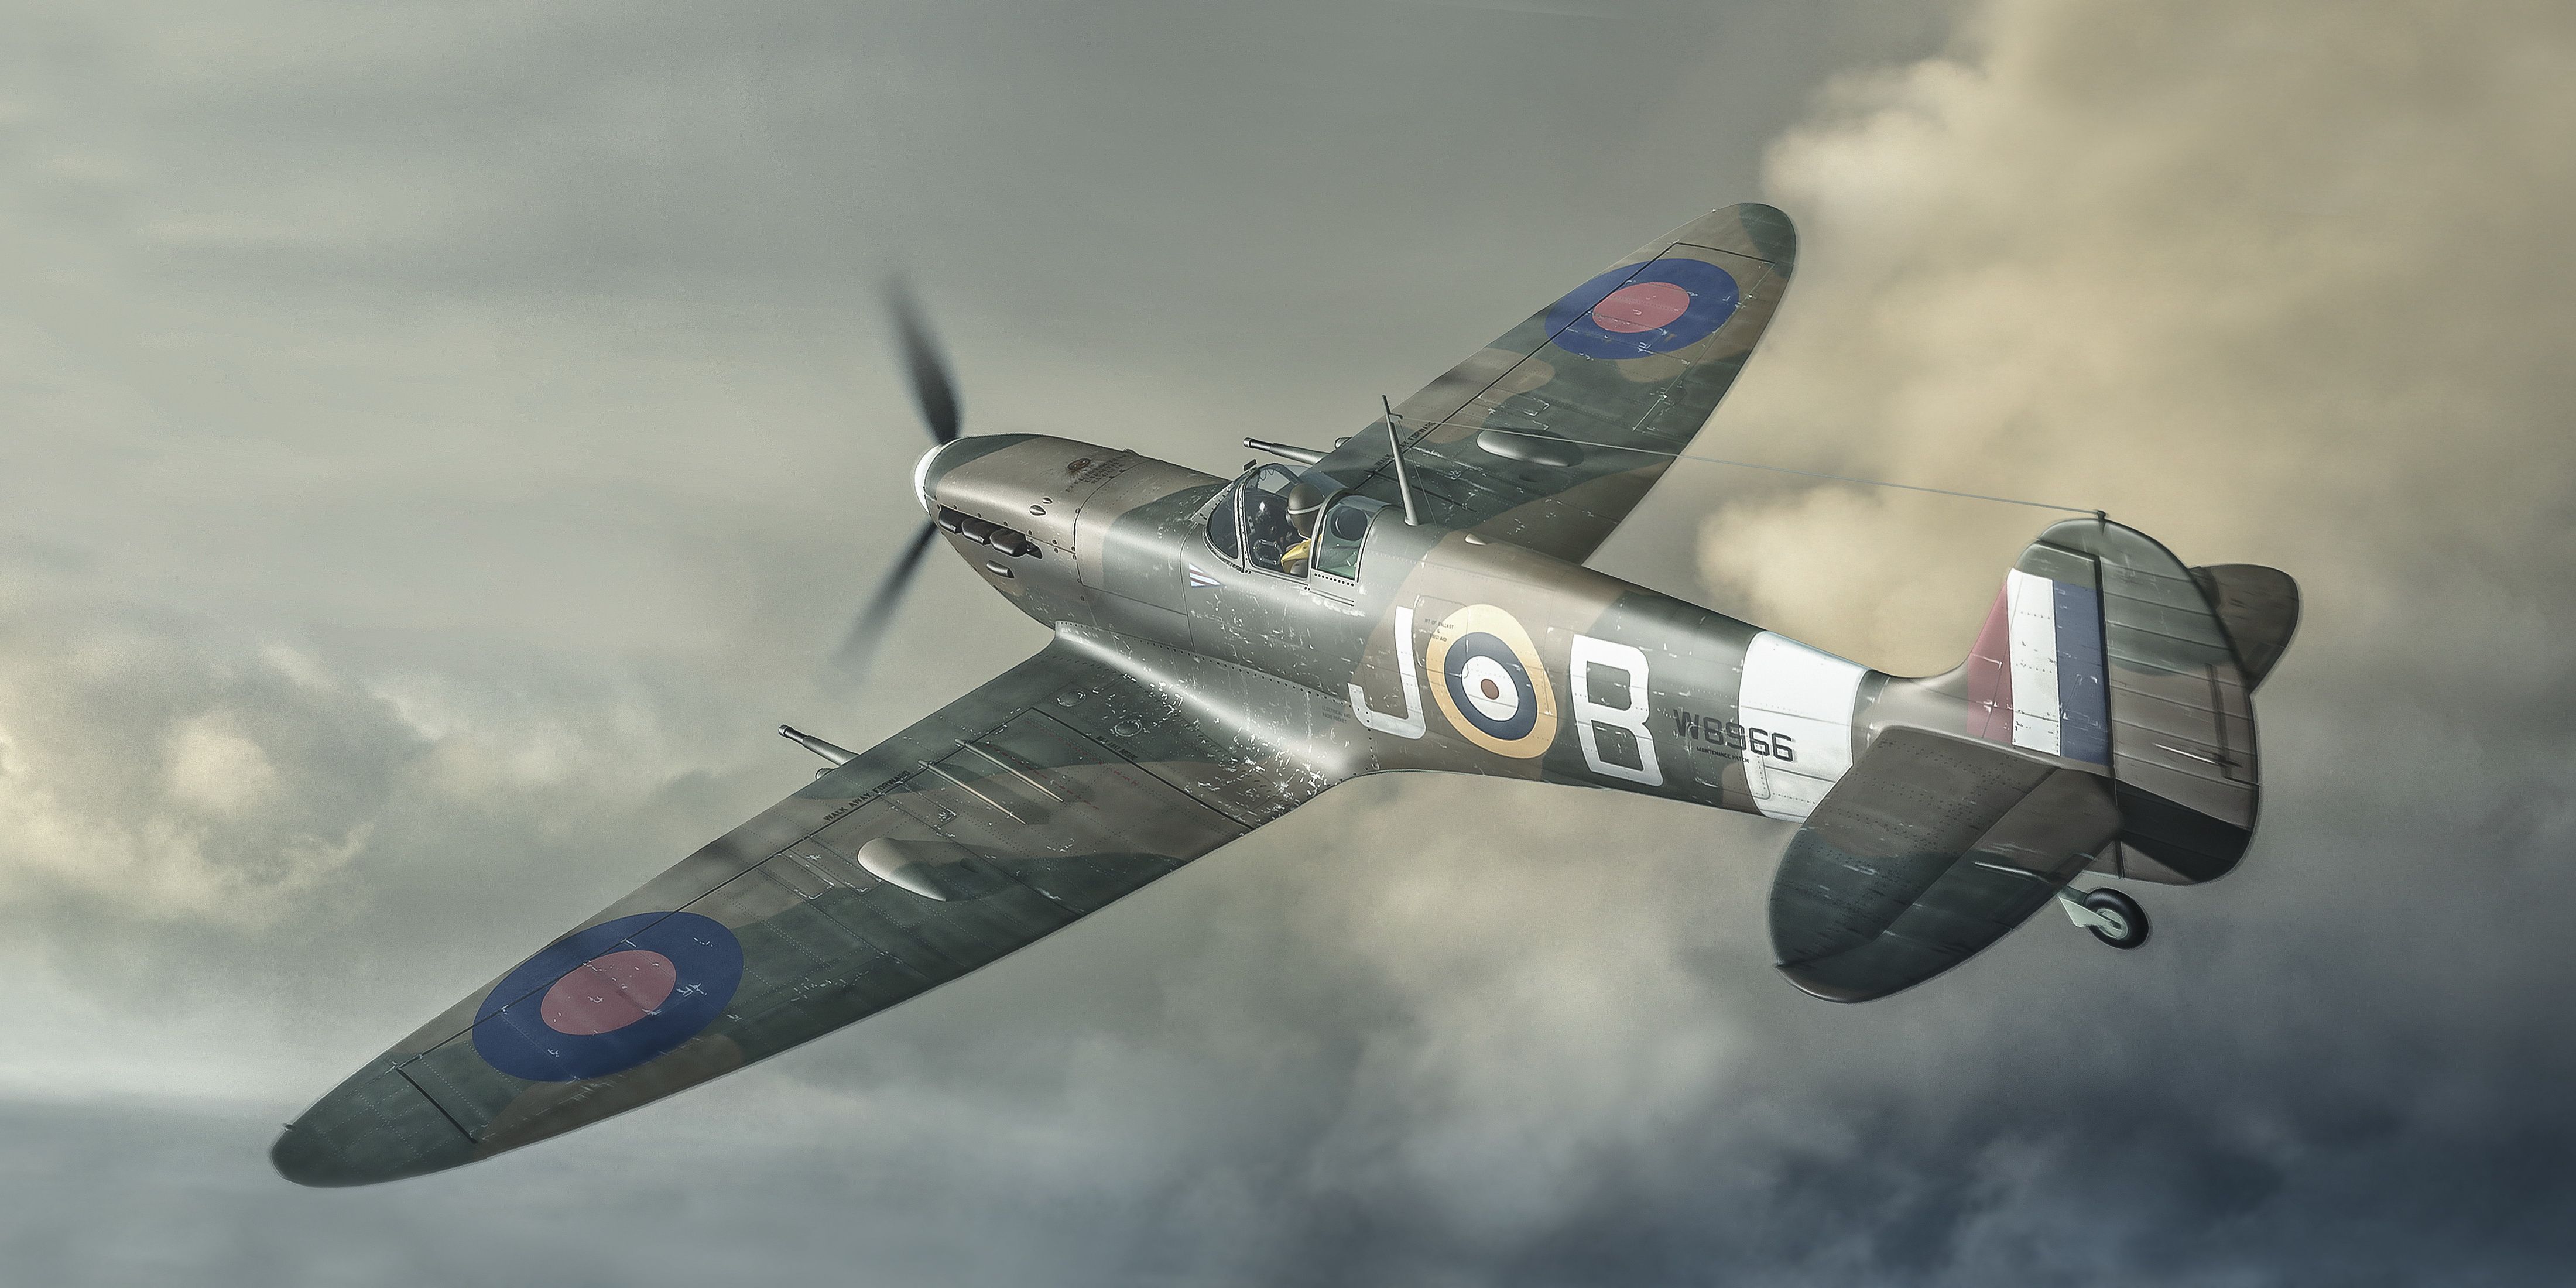 Wallpapers Airplane Painting Art Supermarine Spitfire Aviation